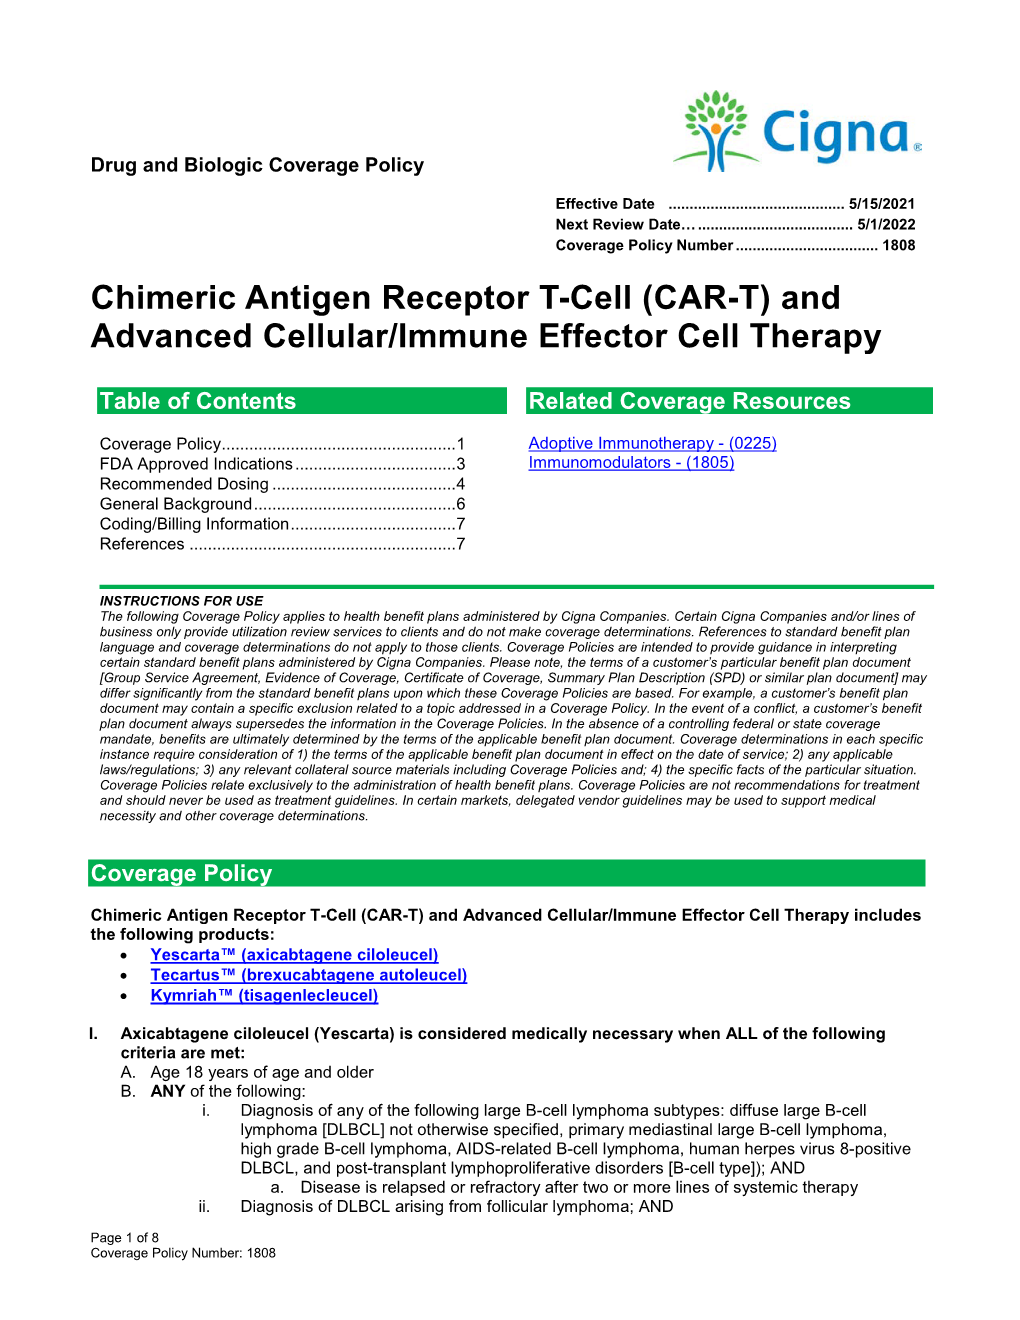 Chimeric Antigen Receptor T-Cell (CAR-T) and Advanced Cellular/Immune Effector Cell Therapy